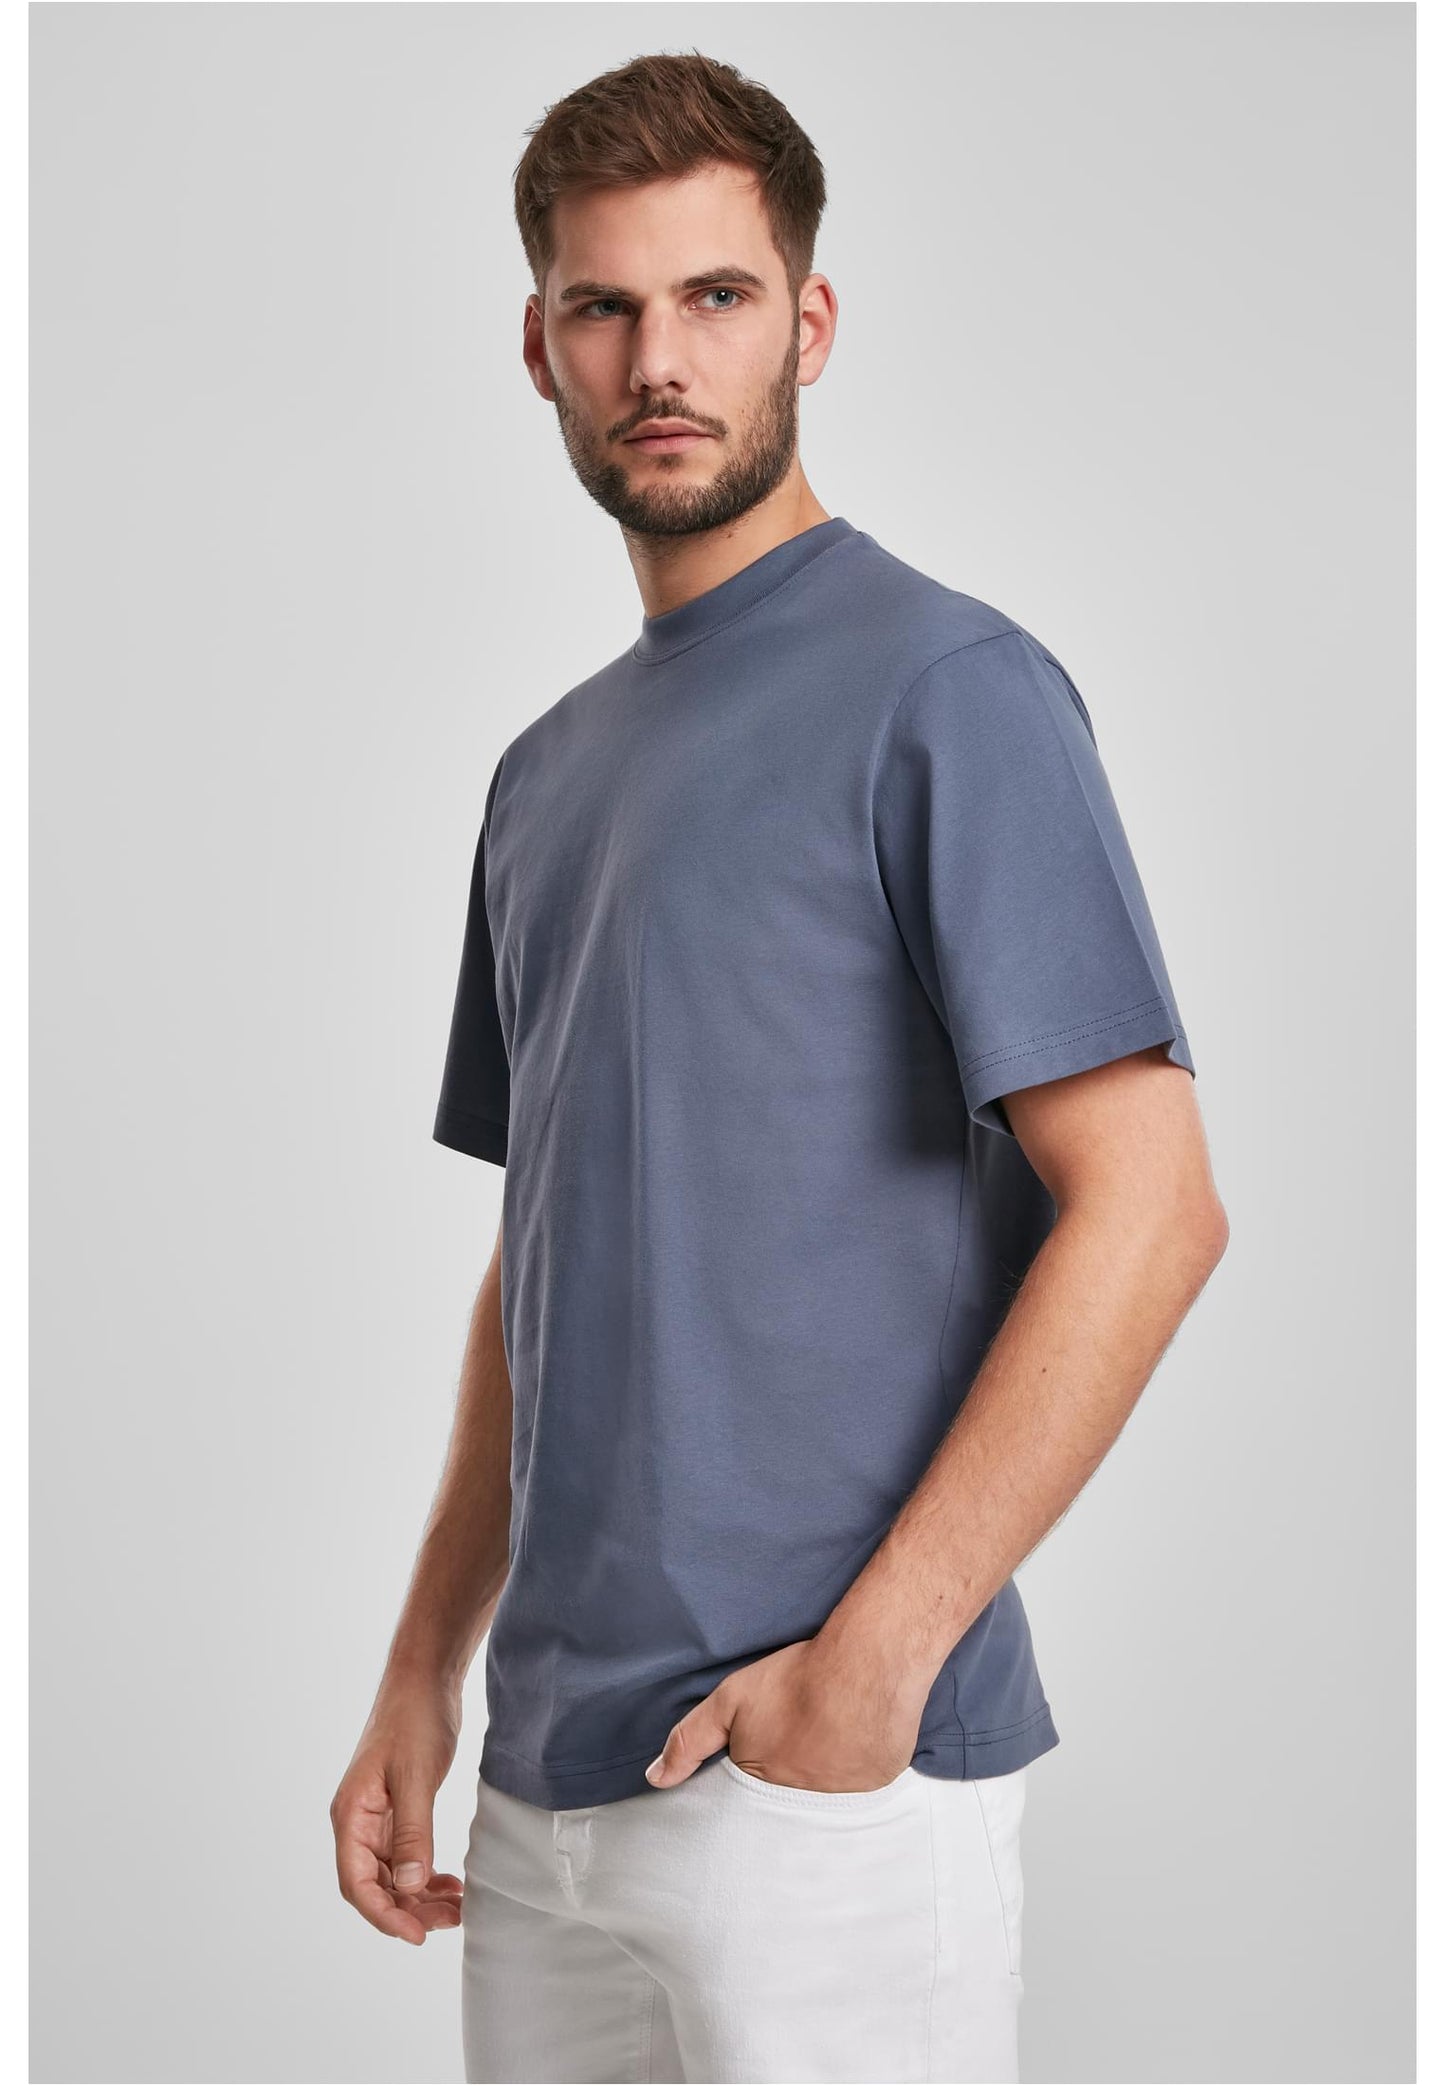 Urban Classics Tall T-Shirt Baggy / Loose Fit in Vintageblue